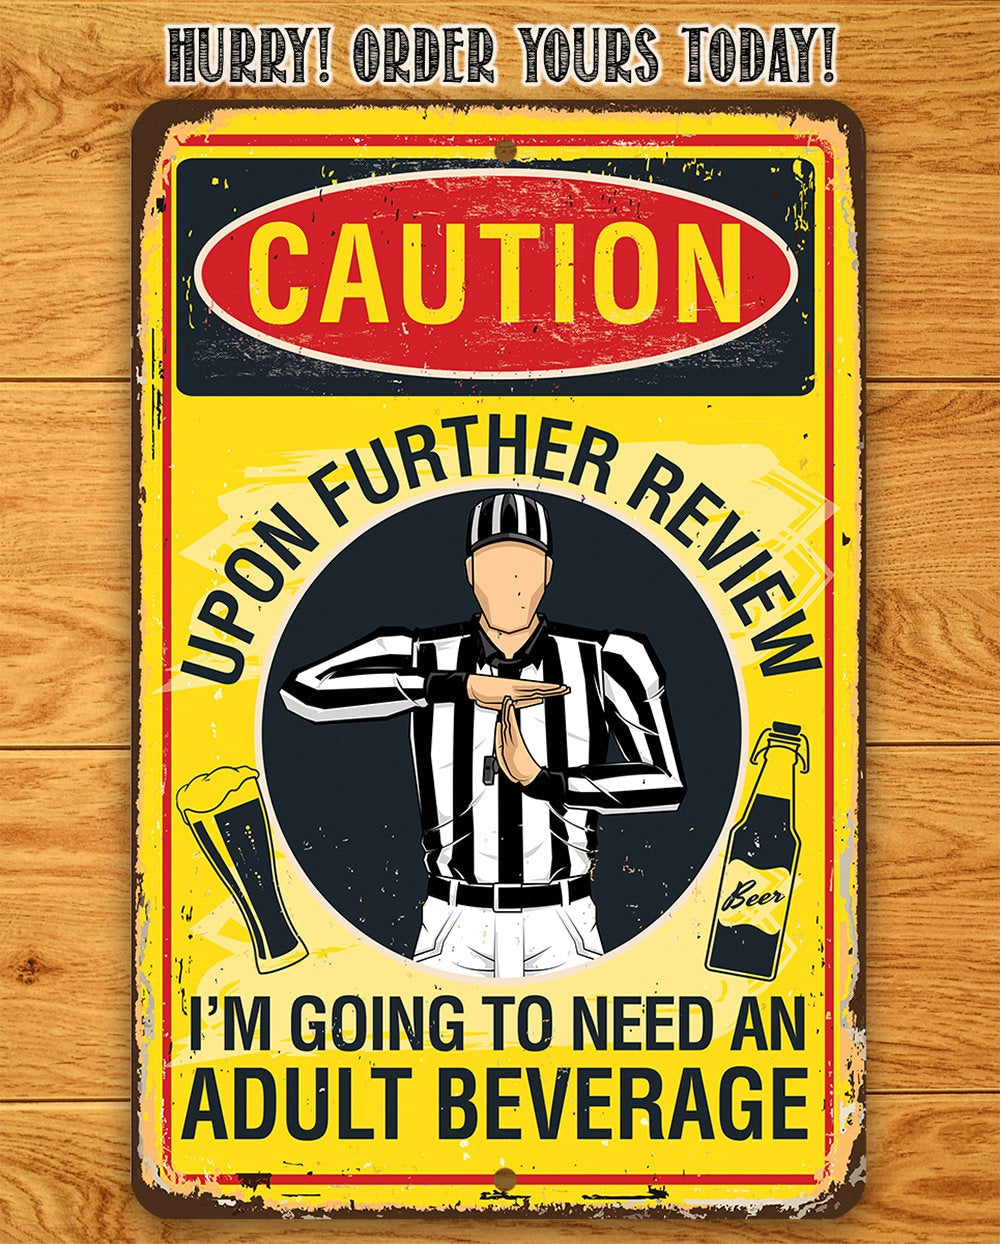 Tin - Metal Sign - Caution, Upon Further Review, I'm Going To Need An Adult Beverage - 8"x12" or 12"x18" Use Indoor/Outdoor-Sports Bar Decor Lone Star Art 